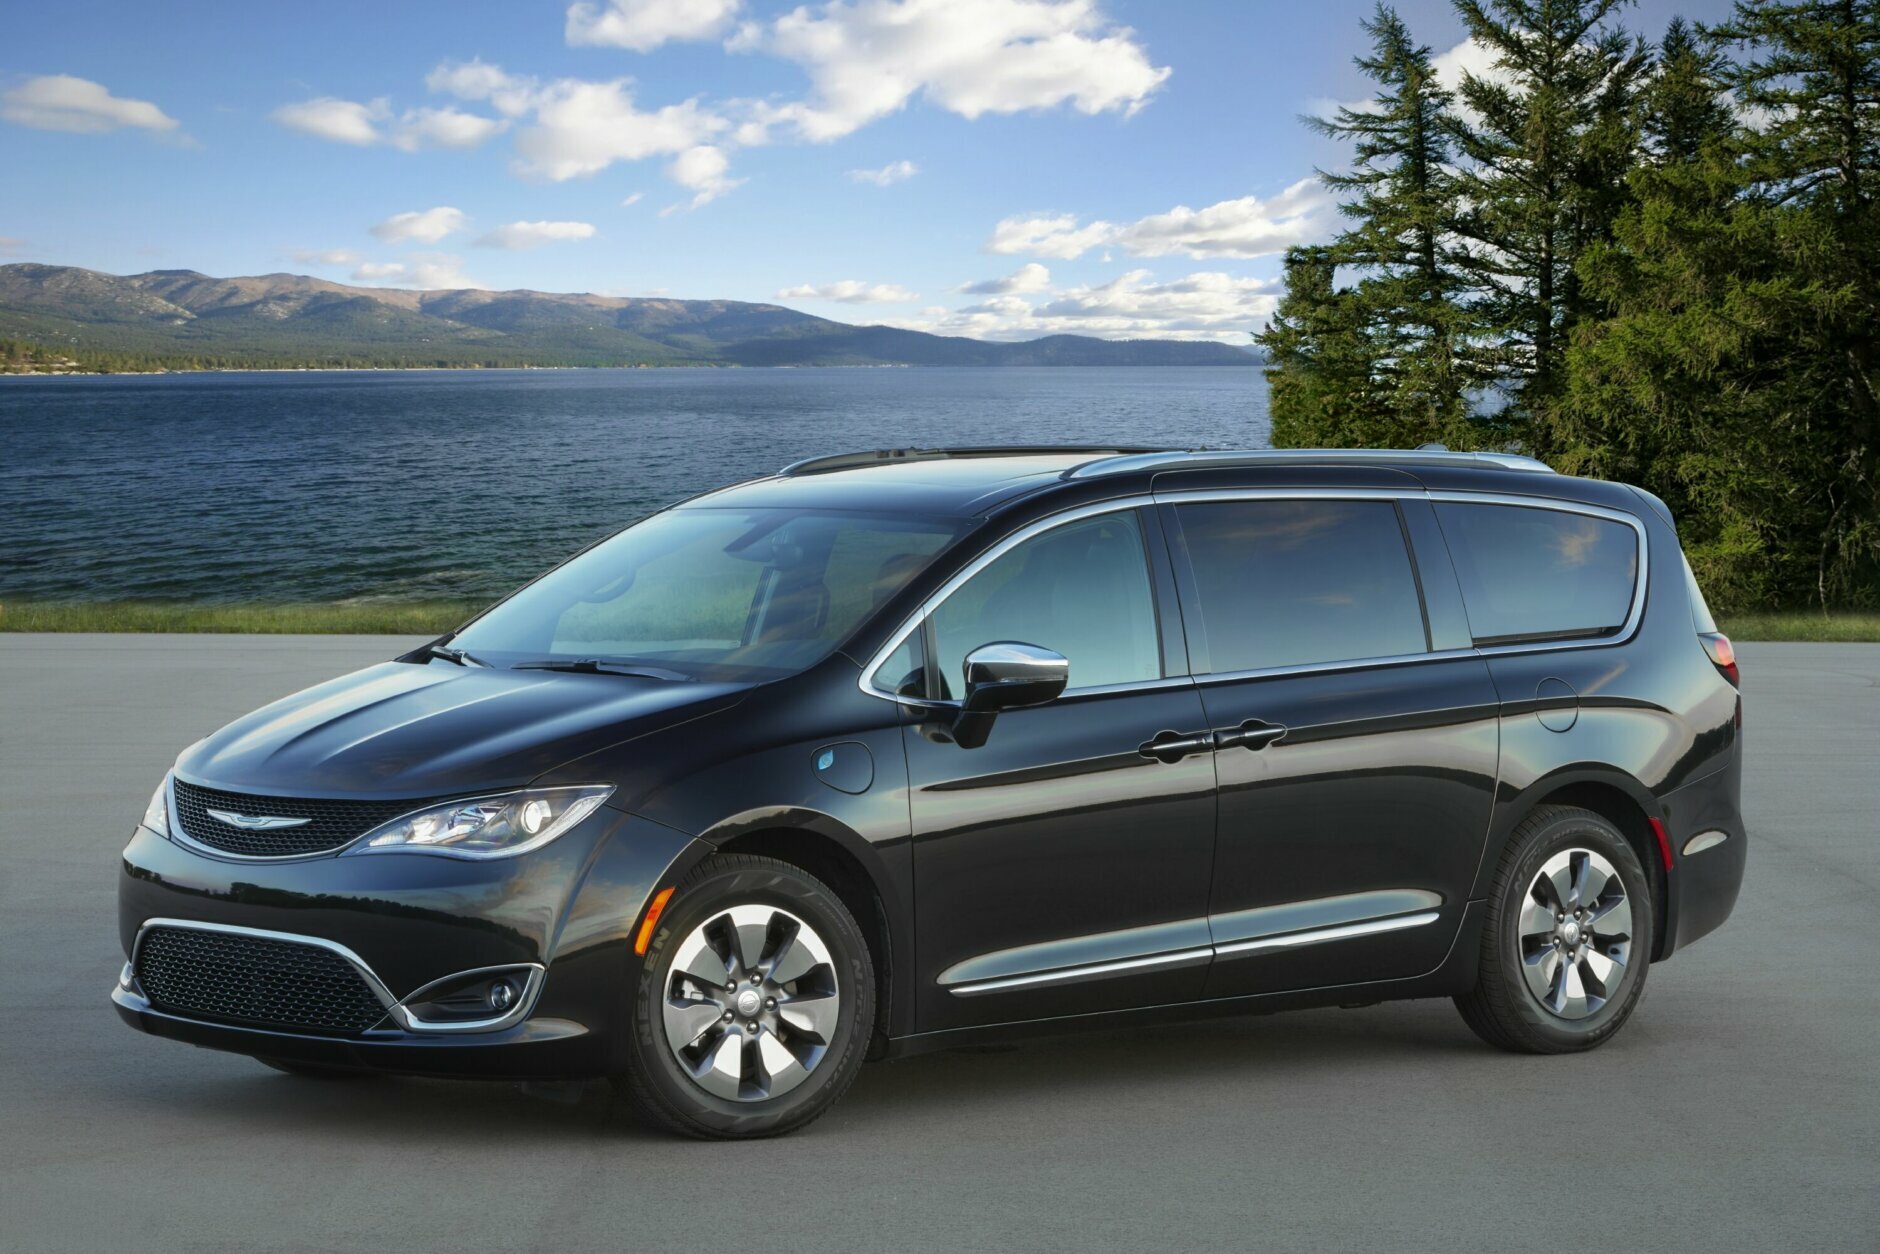 <h3><strong>2020 Chrysler Pacifica Hybrid</strong></h3>
<p><strong>Purchase Deal: </strong>0% financing for 72 months</p>
